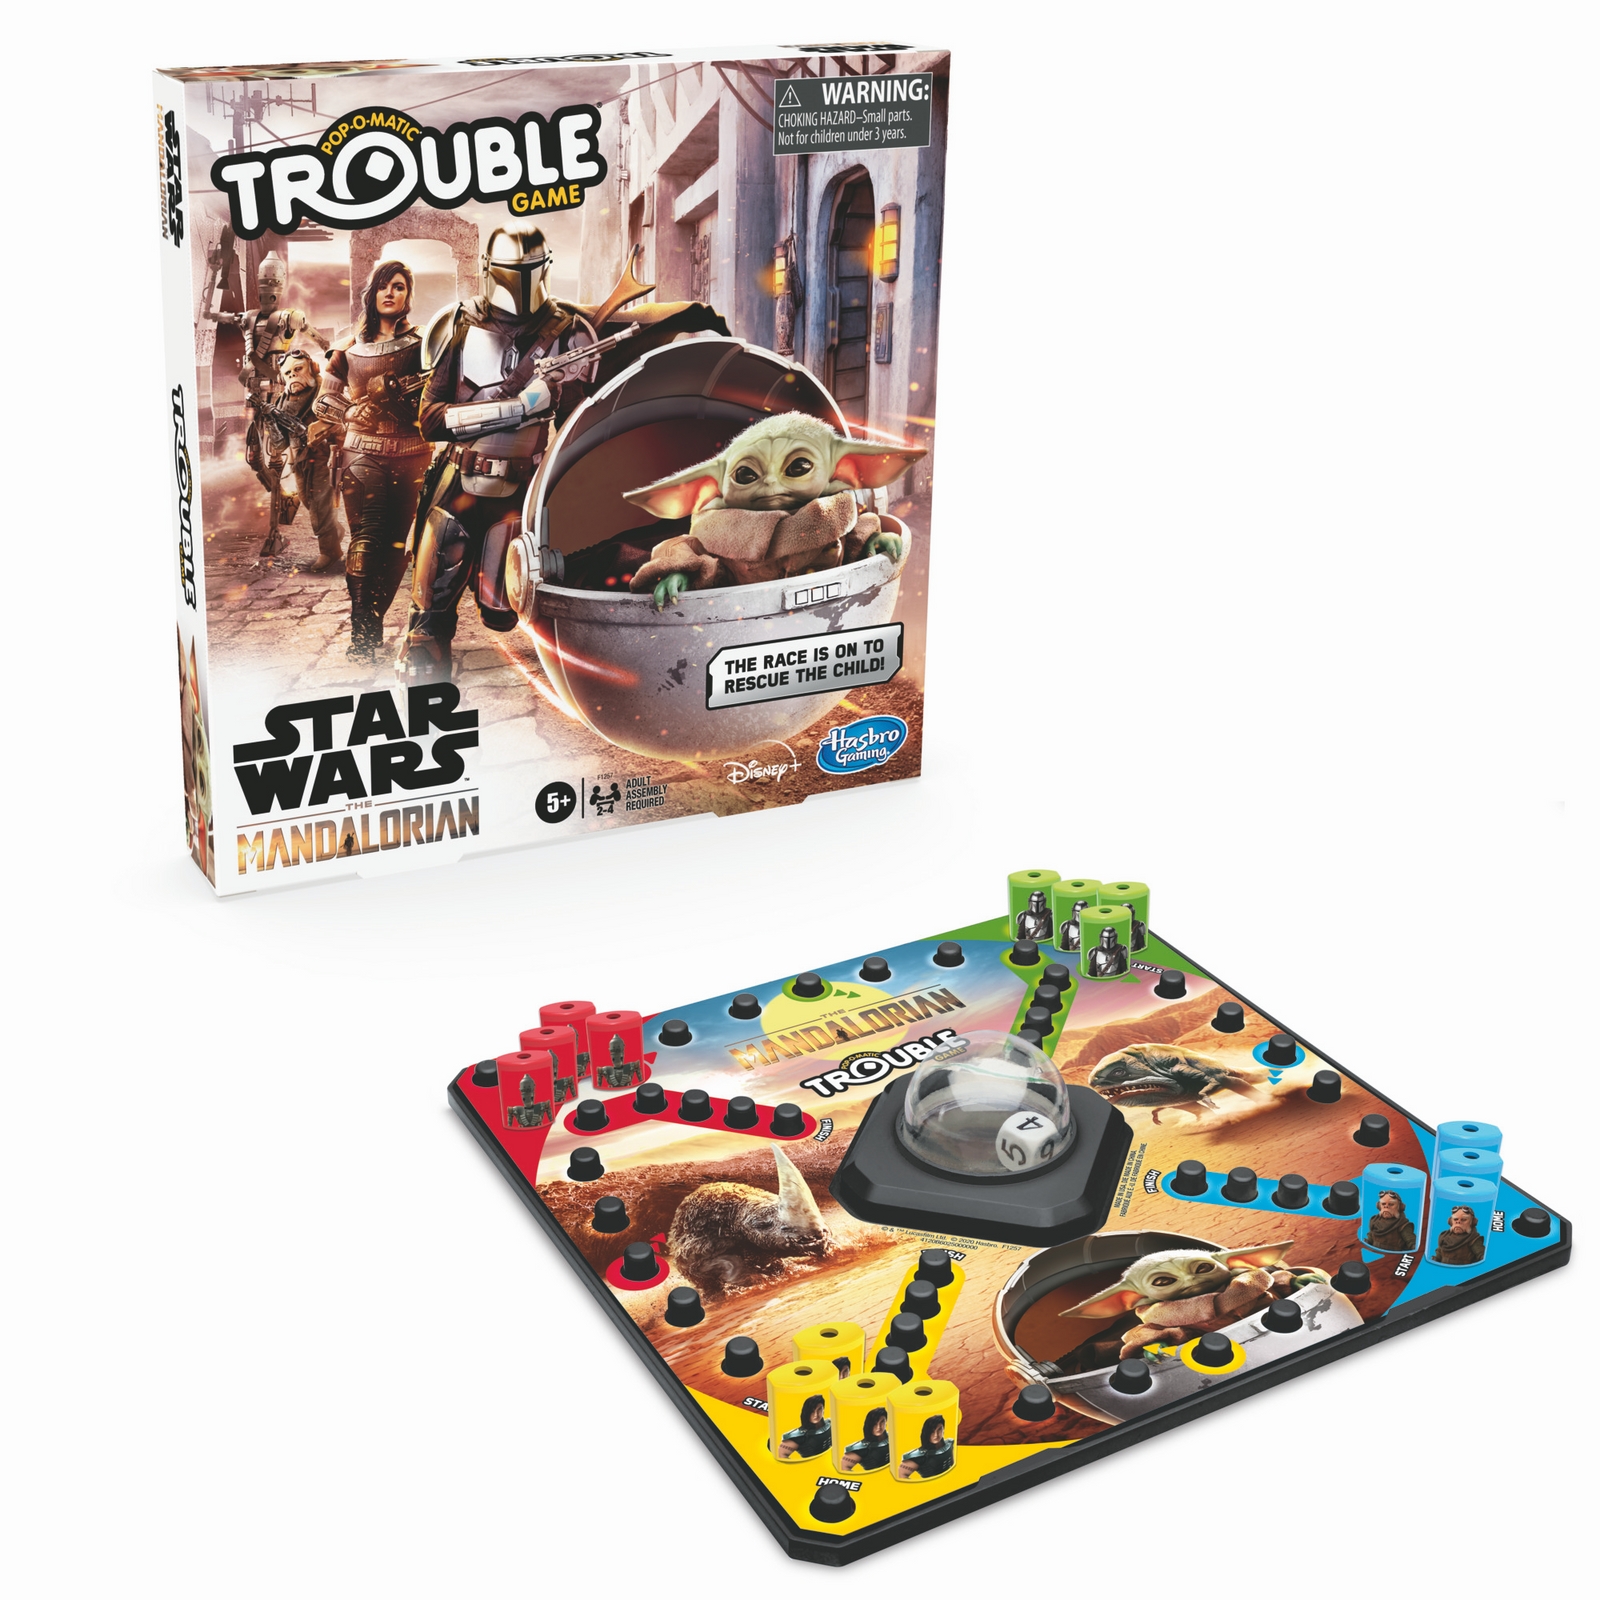 TROUBLE-STAR-WARS-THE-MANDALORIAN-EDITION-Game.jpg